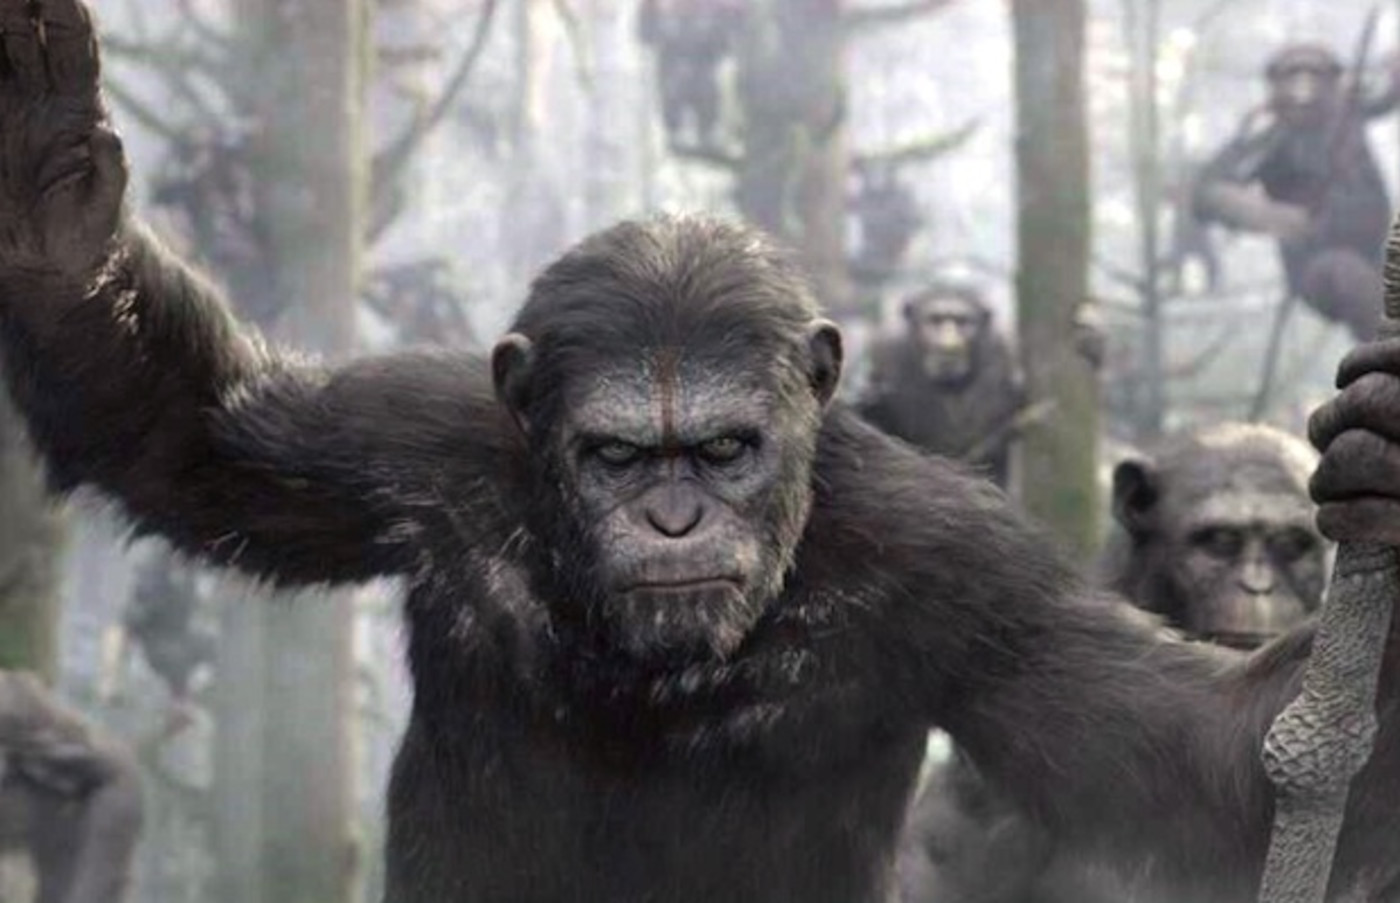 "Dawn of the of the Apes" Releases Posters, and Reveals New